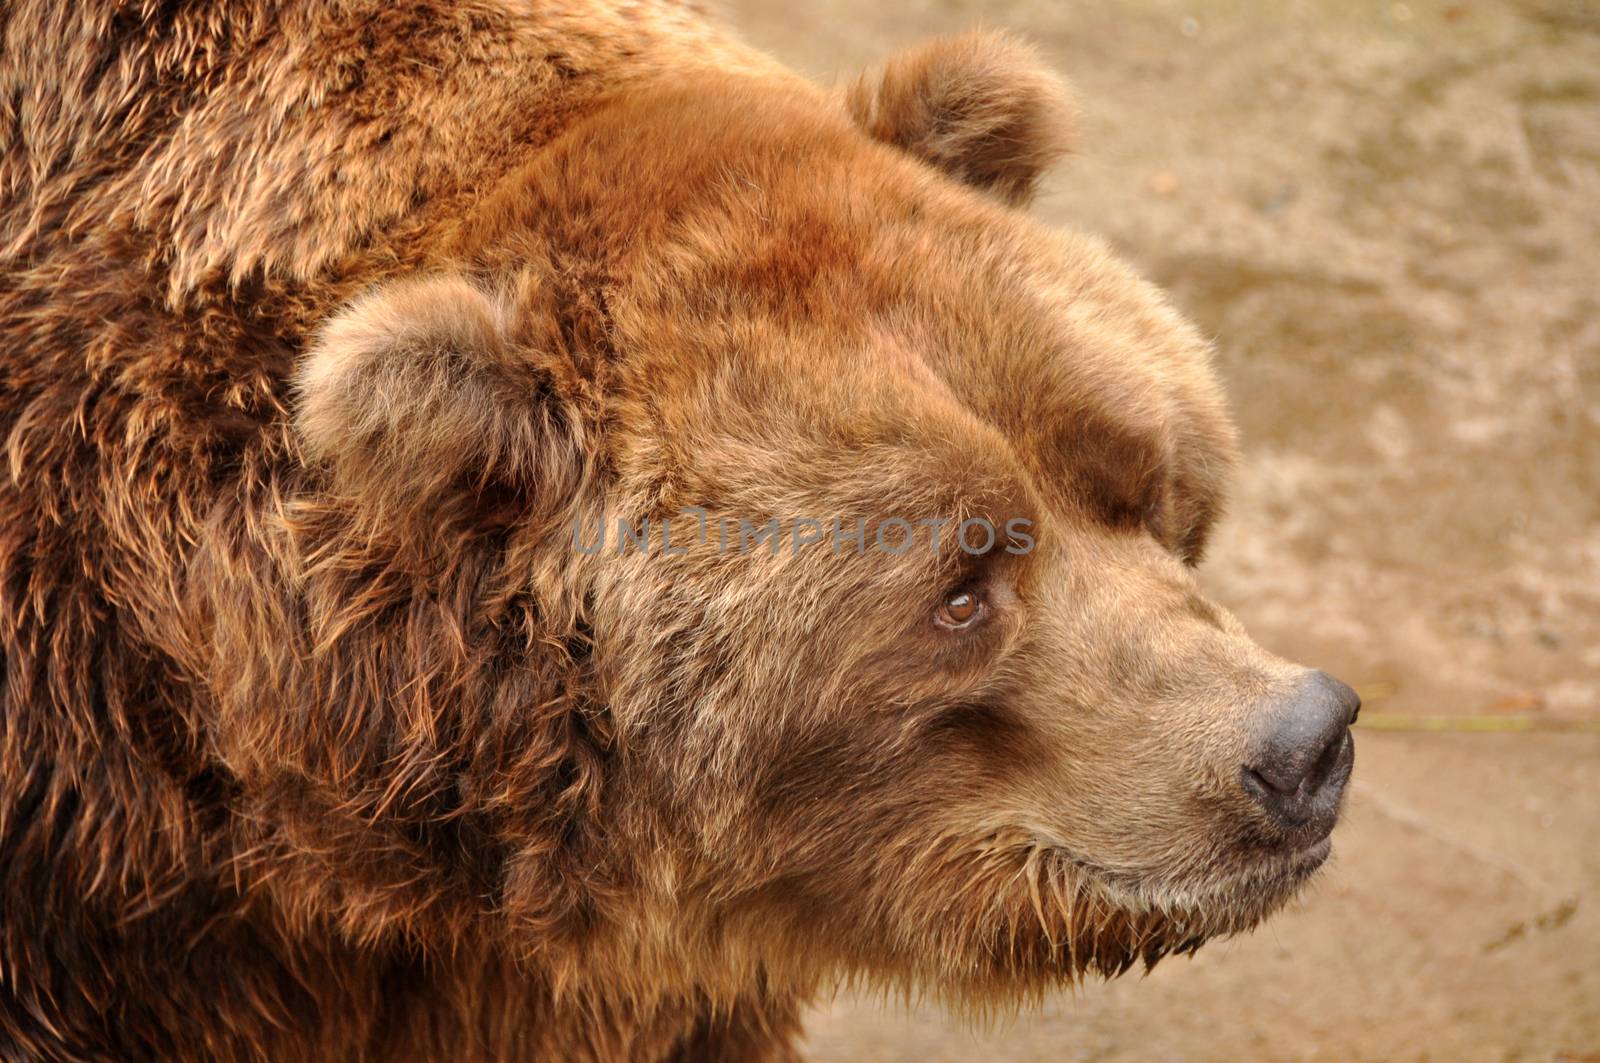 Grizzly brown bear closeup portrait in zoo, Latvia